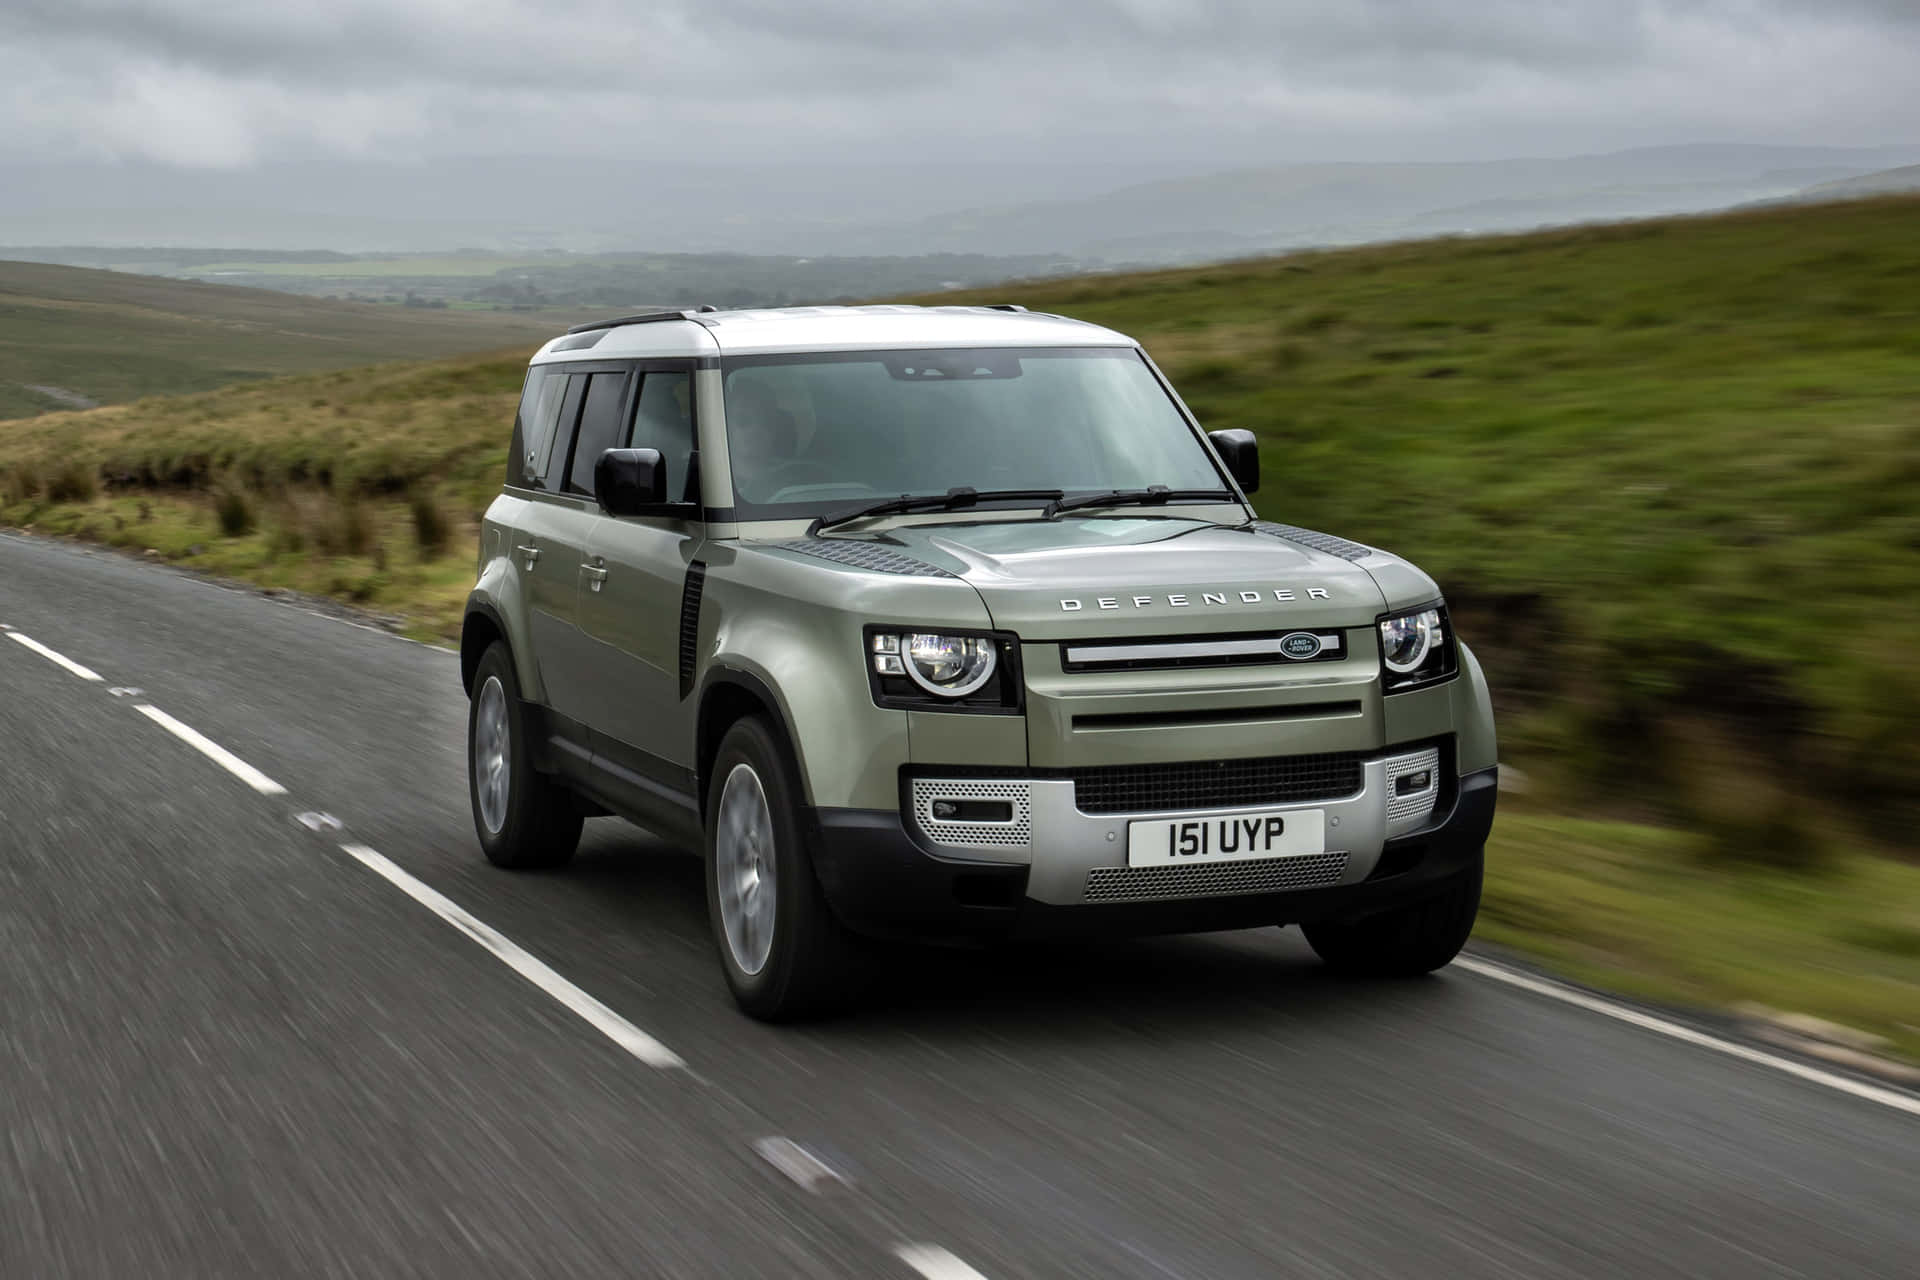 The Rugged Off-Road Majesty: Land Rover Defender Wallpaper